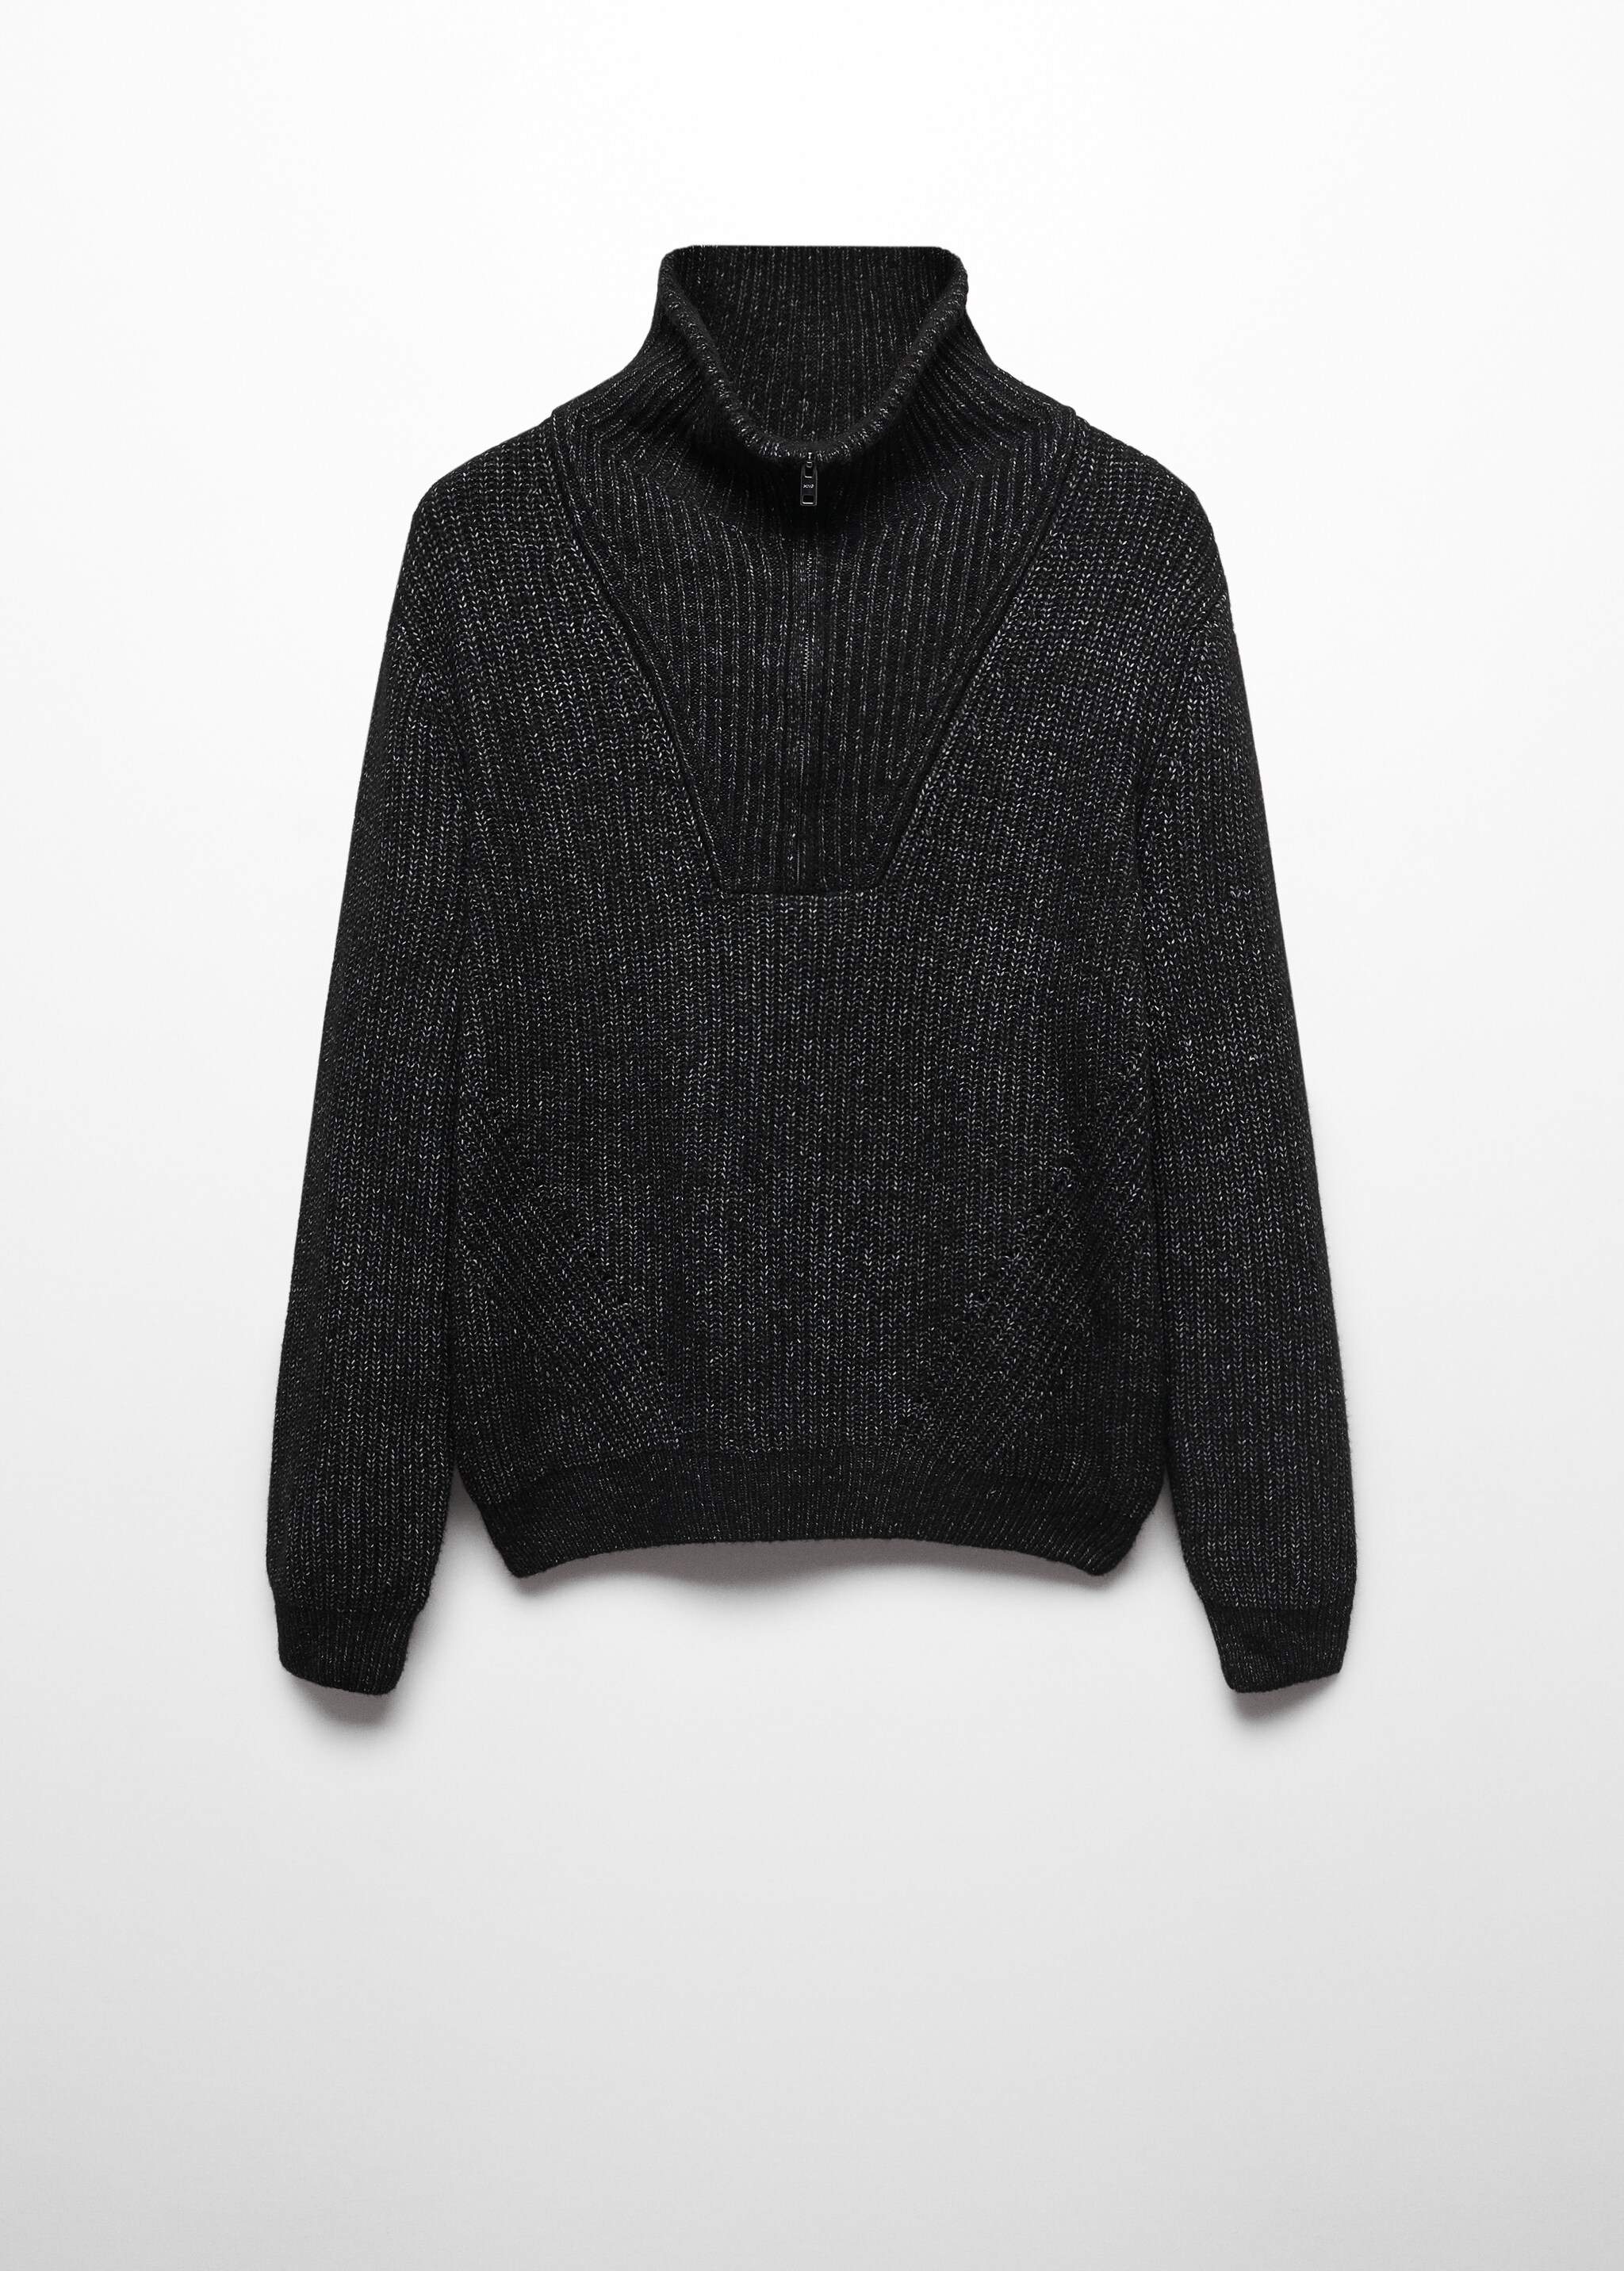 Perkins zip neck wool sweater - Article without model